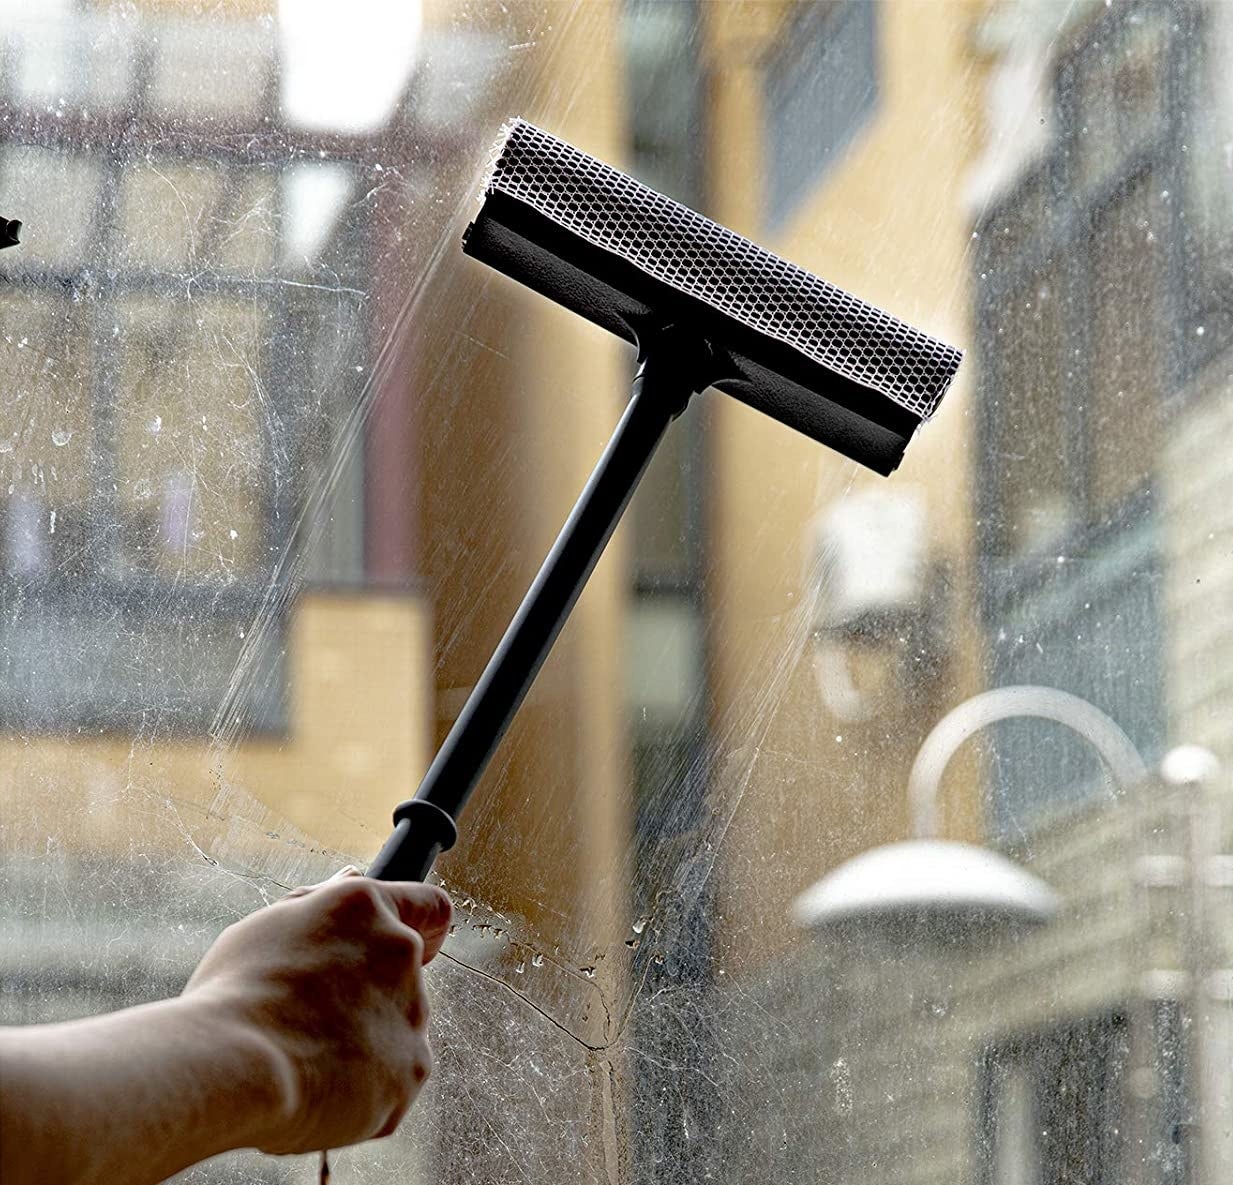 person cleaning a glass window with the squeegee